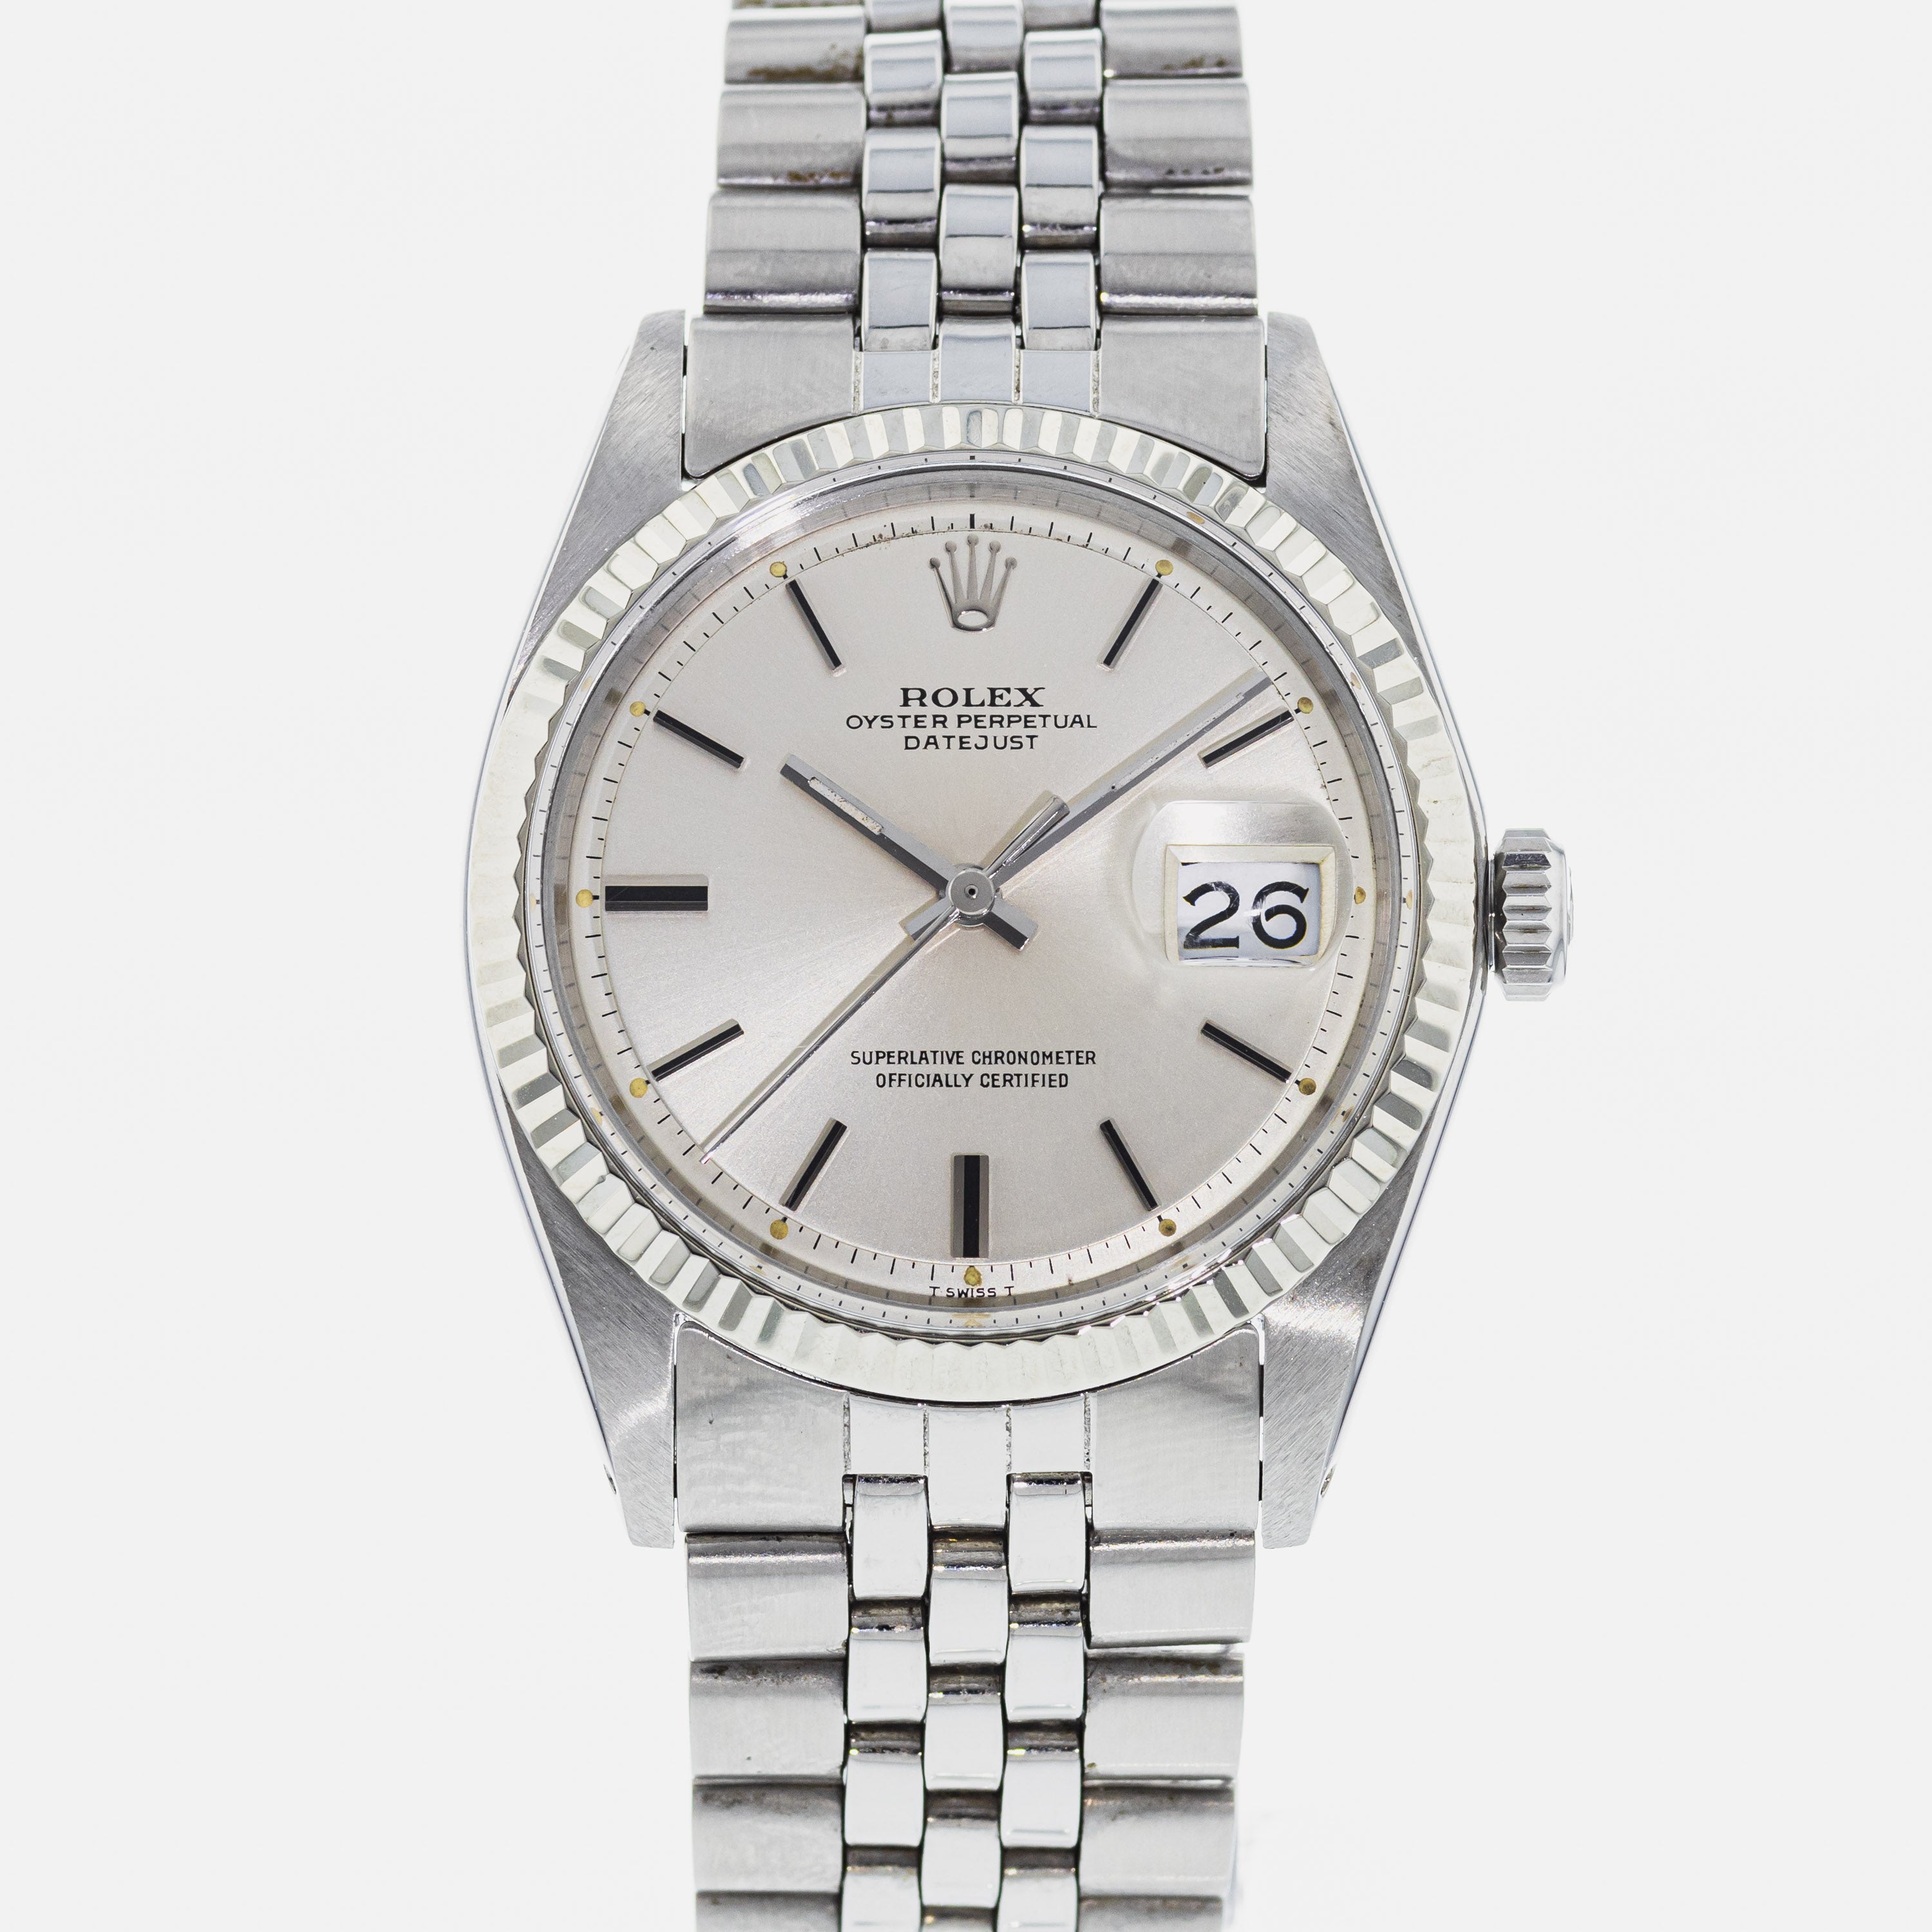 Authentic Used Rolex Datejust 1601 Watch